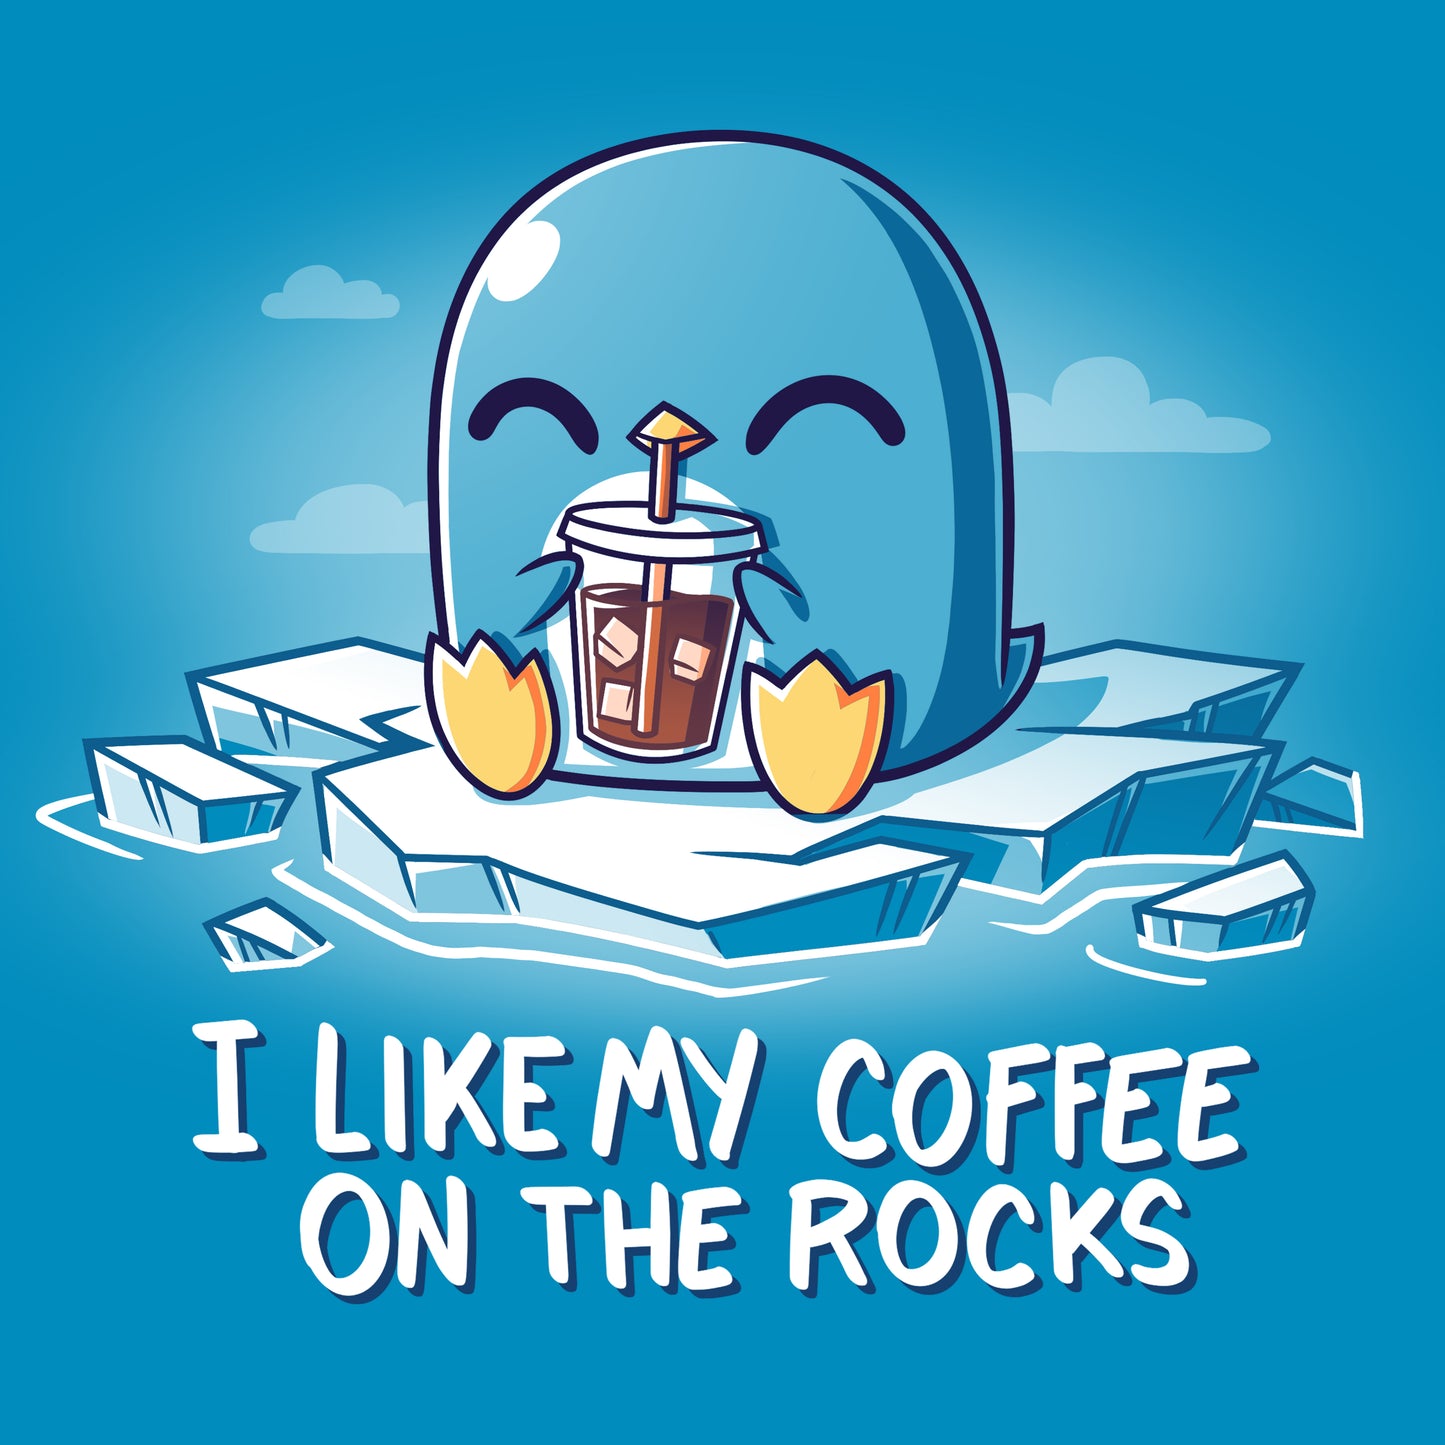 I like "I Like My Coffee on the Rocks" from TeeTurtle, especially when it's iced.